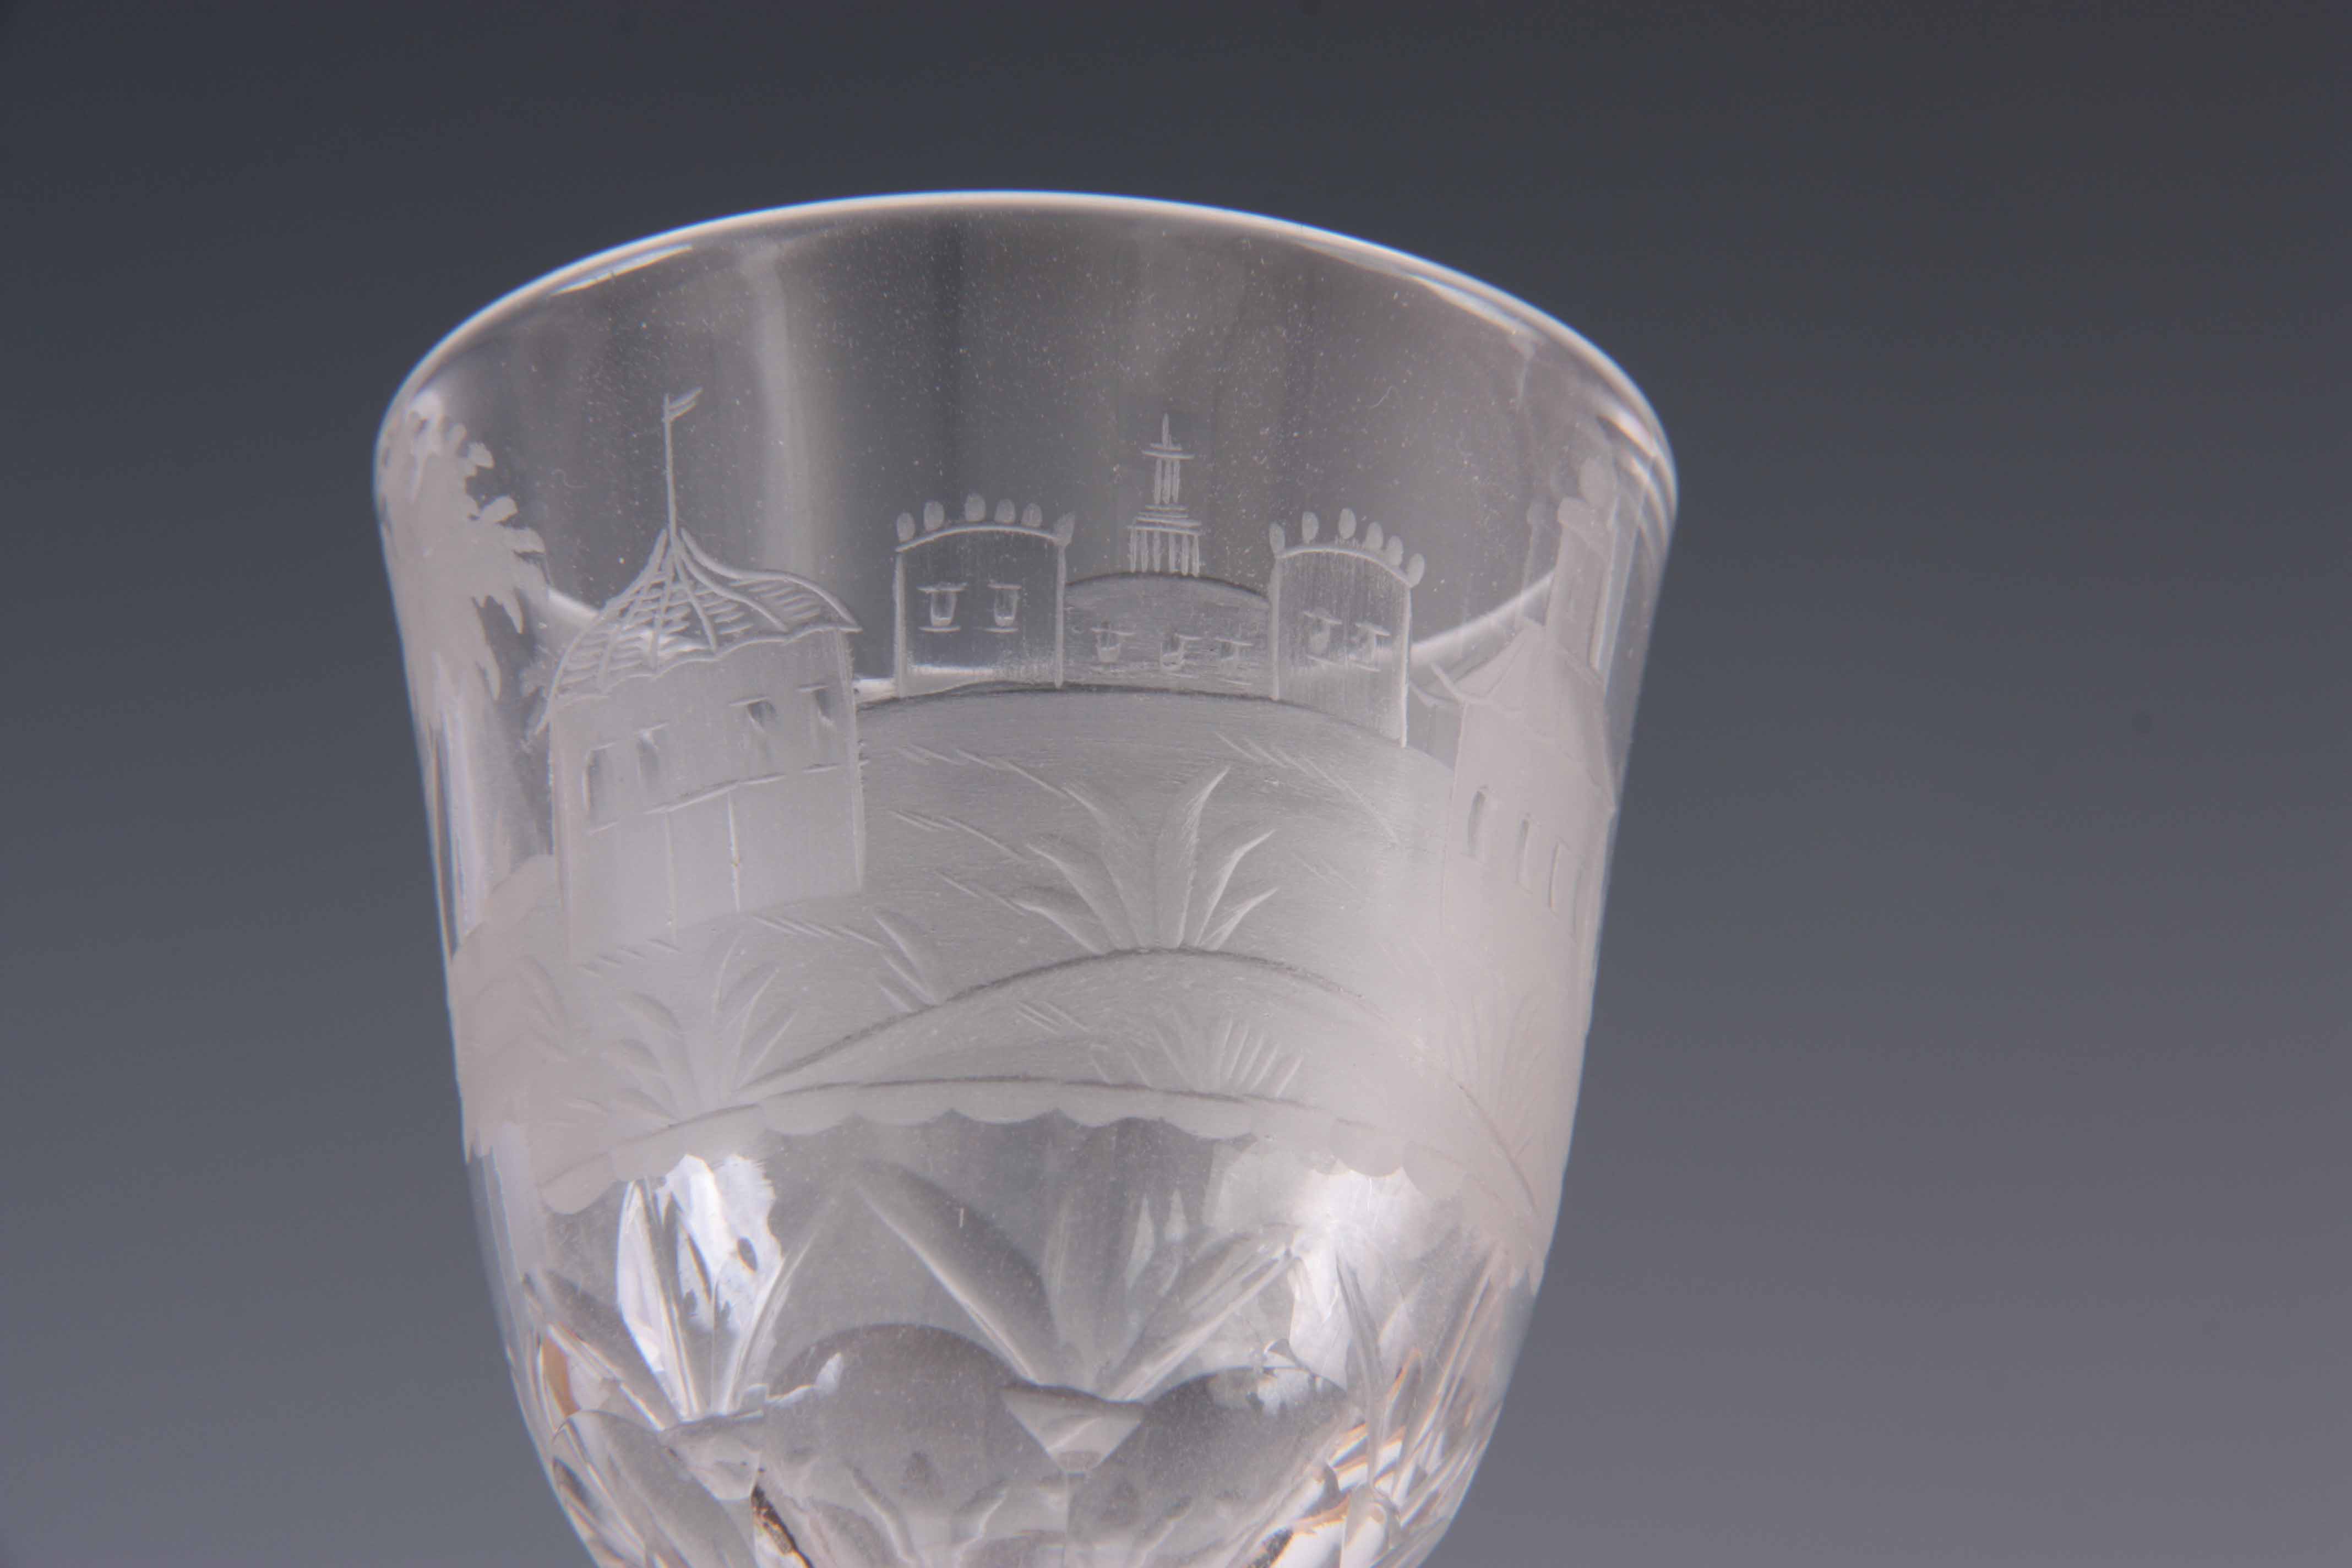 A SET OF THREE GEORGIAN ENGLISH WINE GLASSES with unusual etched scenes depicting Chinese pagodas in - Image 5 of 7